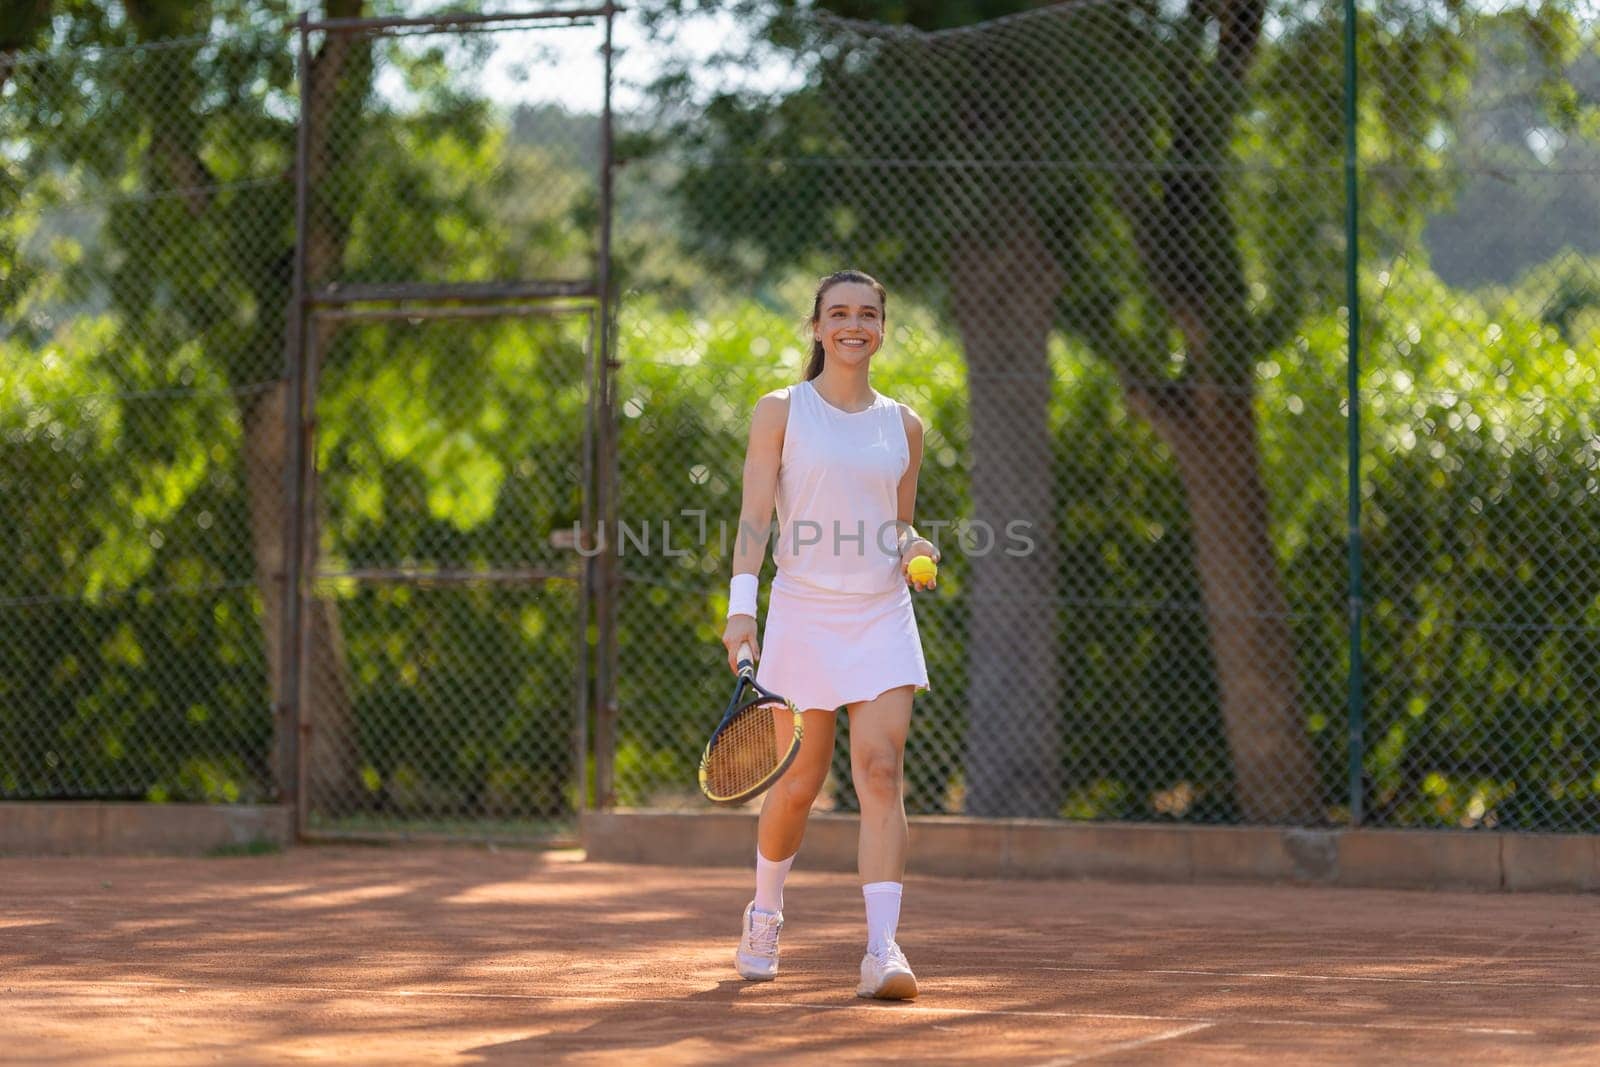 A woman is playing tennis on a court. She is holding a tennis racket and a tennis ball